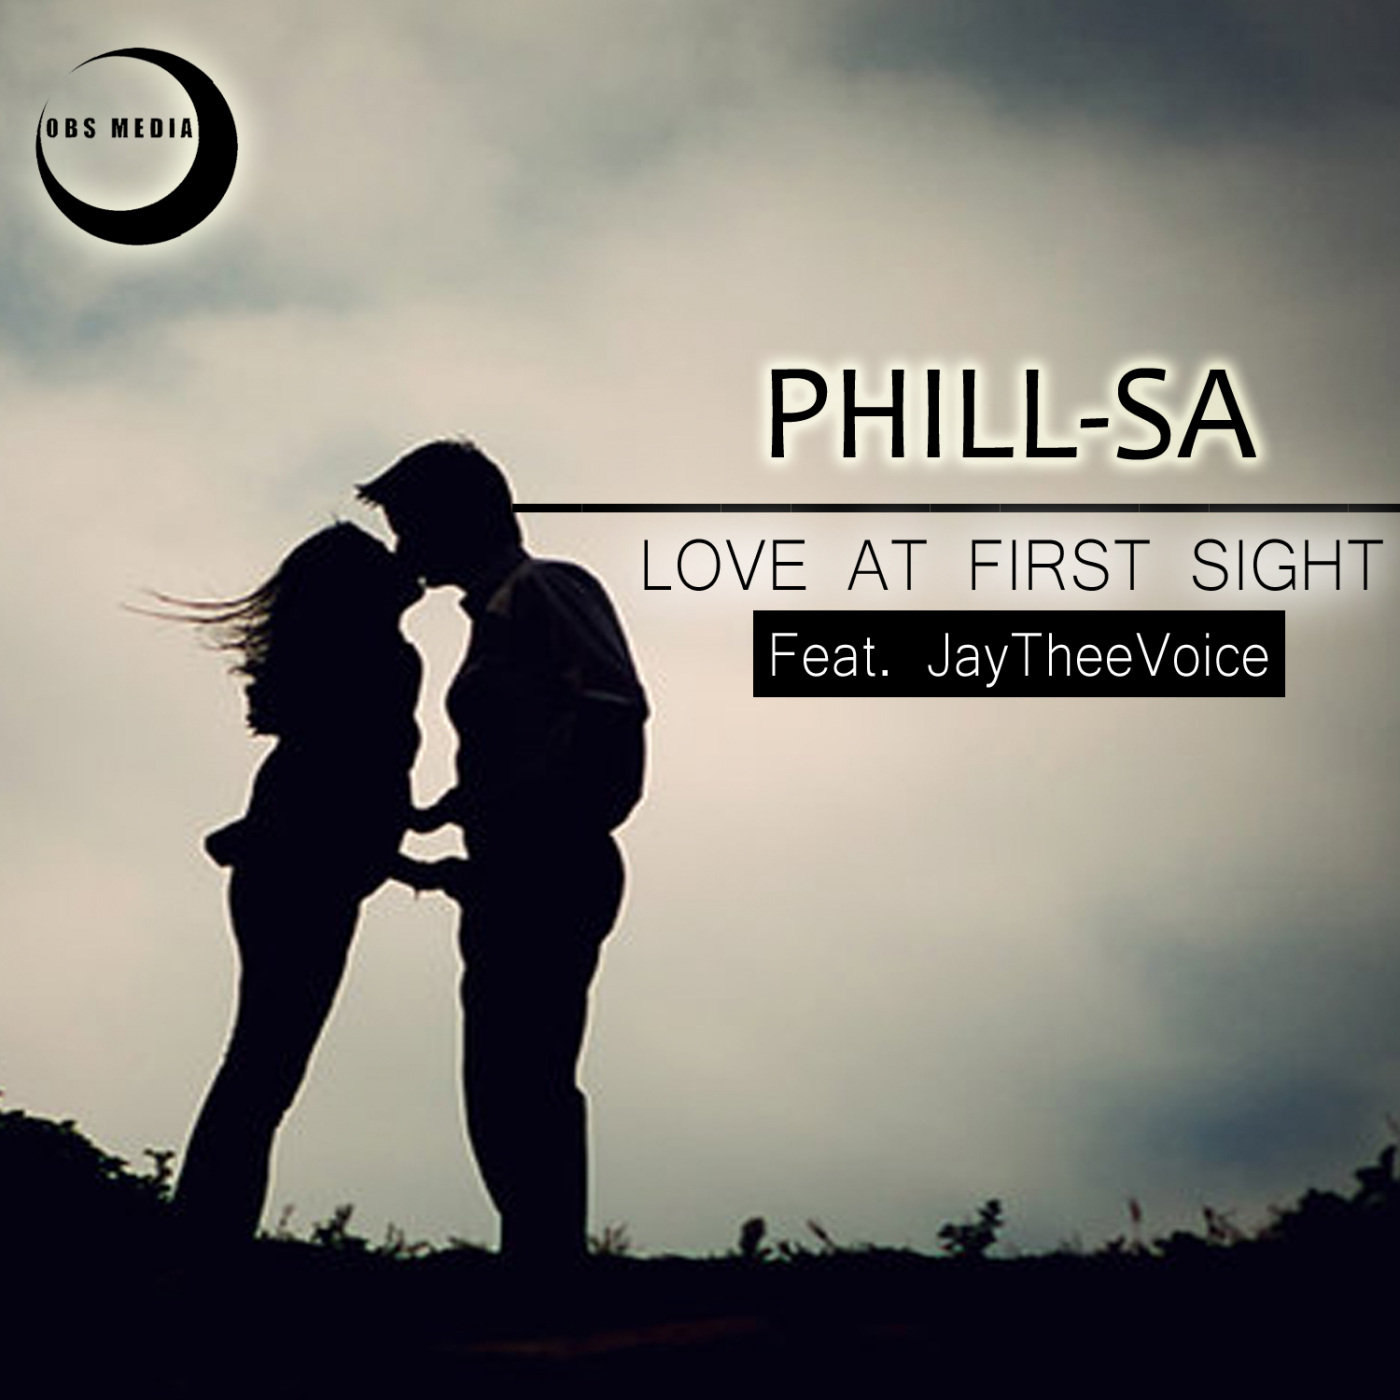 PHill SA - Love At First Sight Feat JayTheeVoice / OBS Media